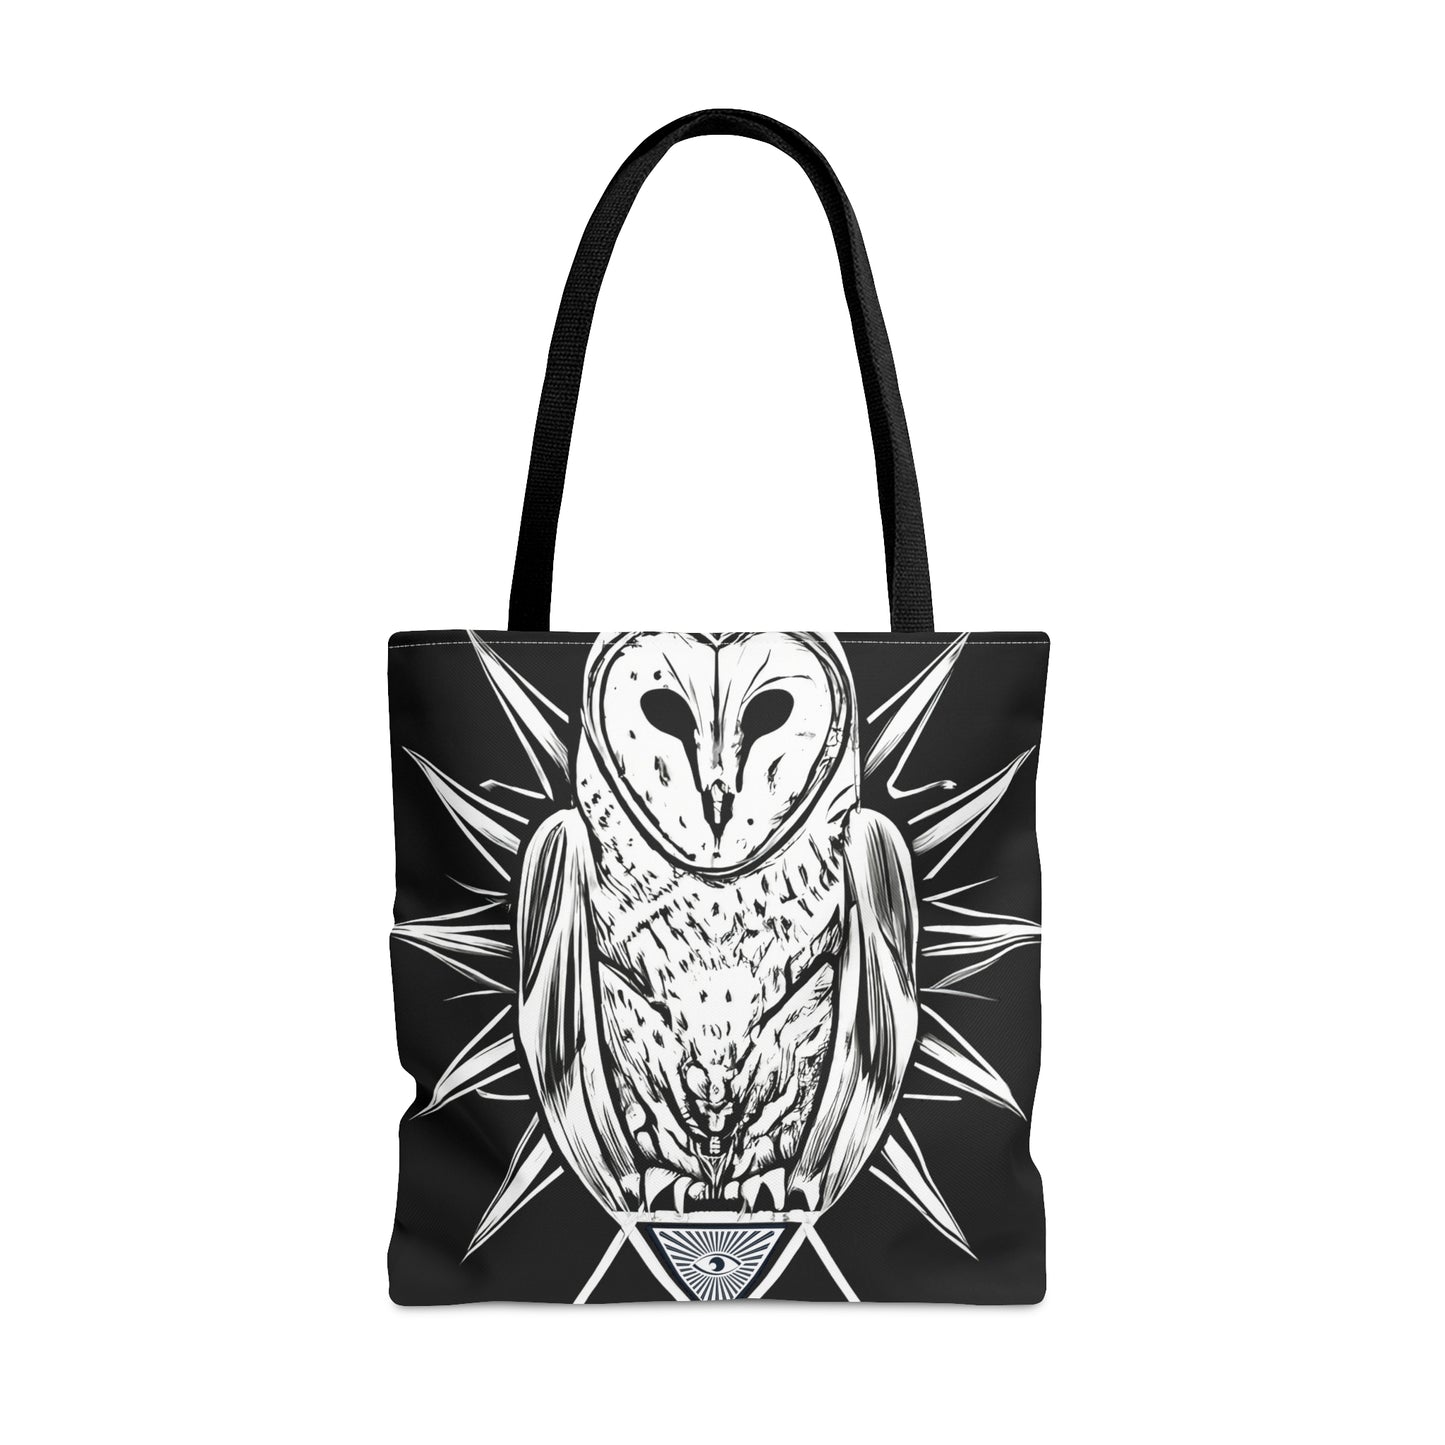 All-Seeing Eye Owl Tote